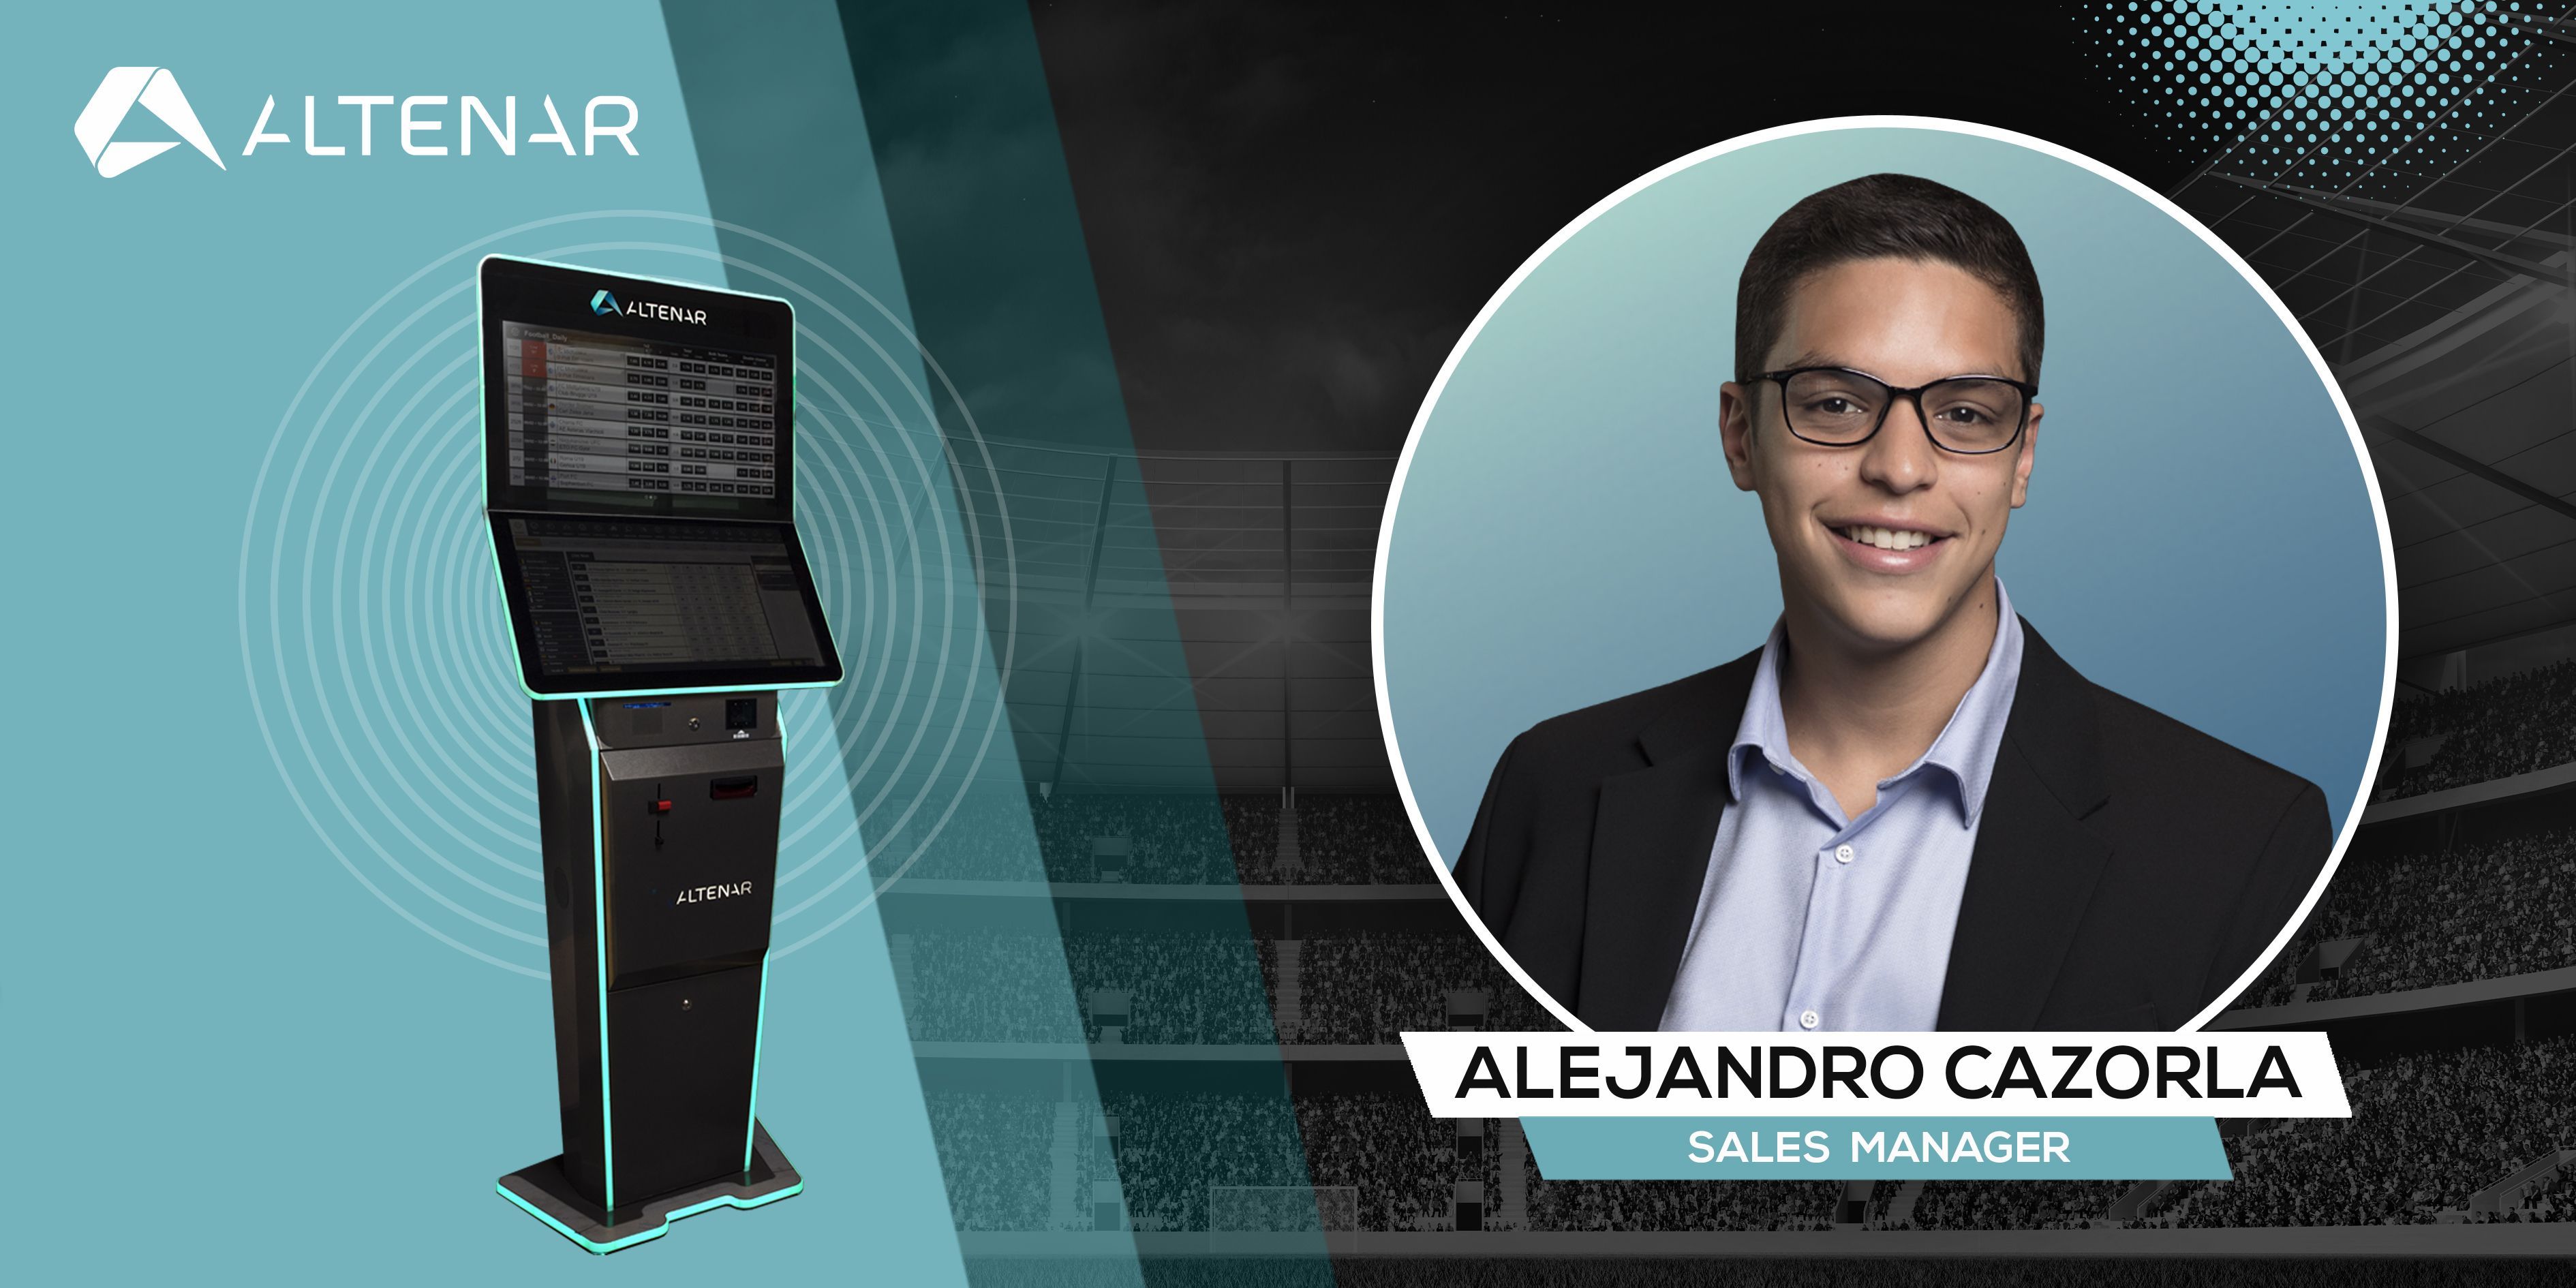 Altenar Sales Manager Alejandro Cazorla Speaks On The Effects And Features Of The Sportsbook Providers Betting Terminals